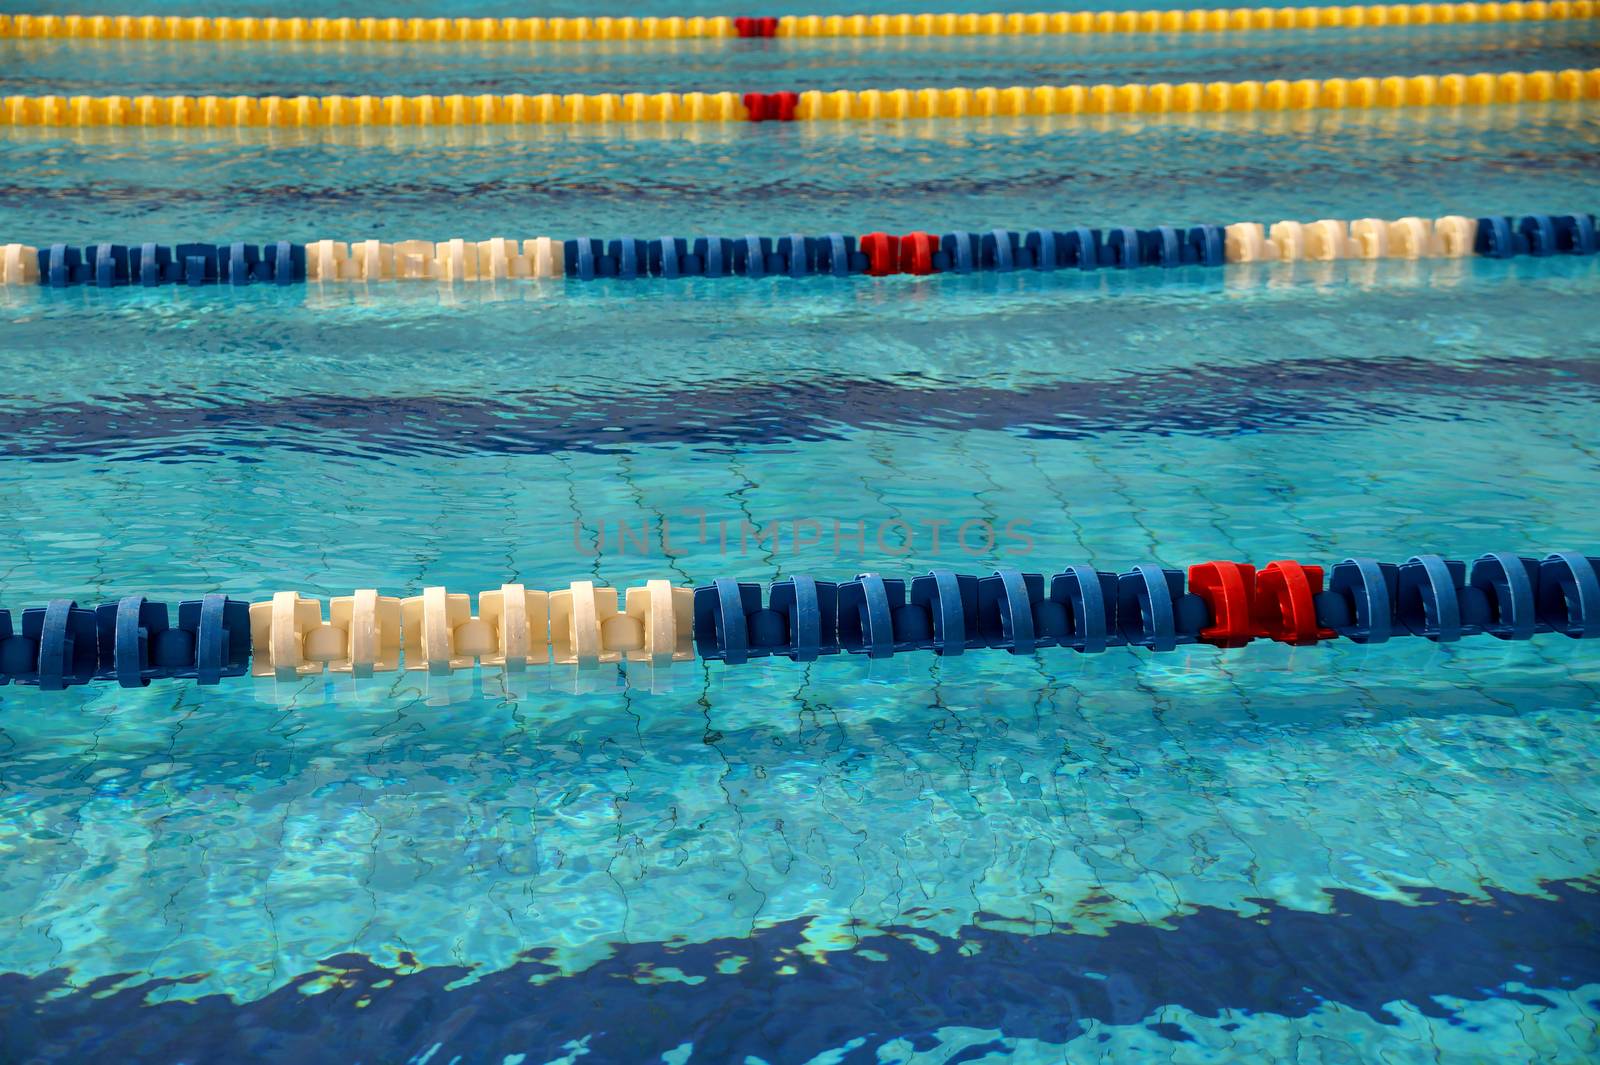 Dividers of paths in the big outdoor swimming pool